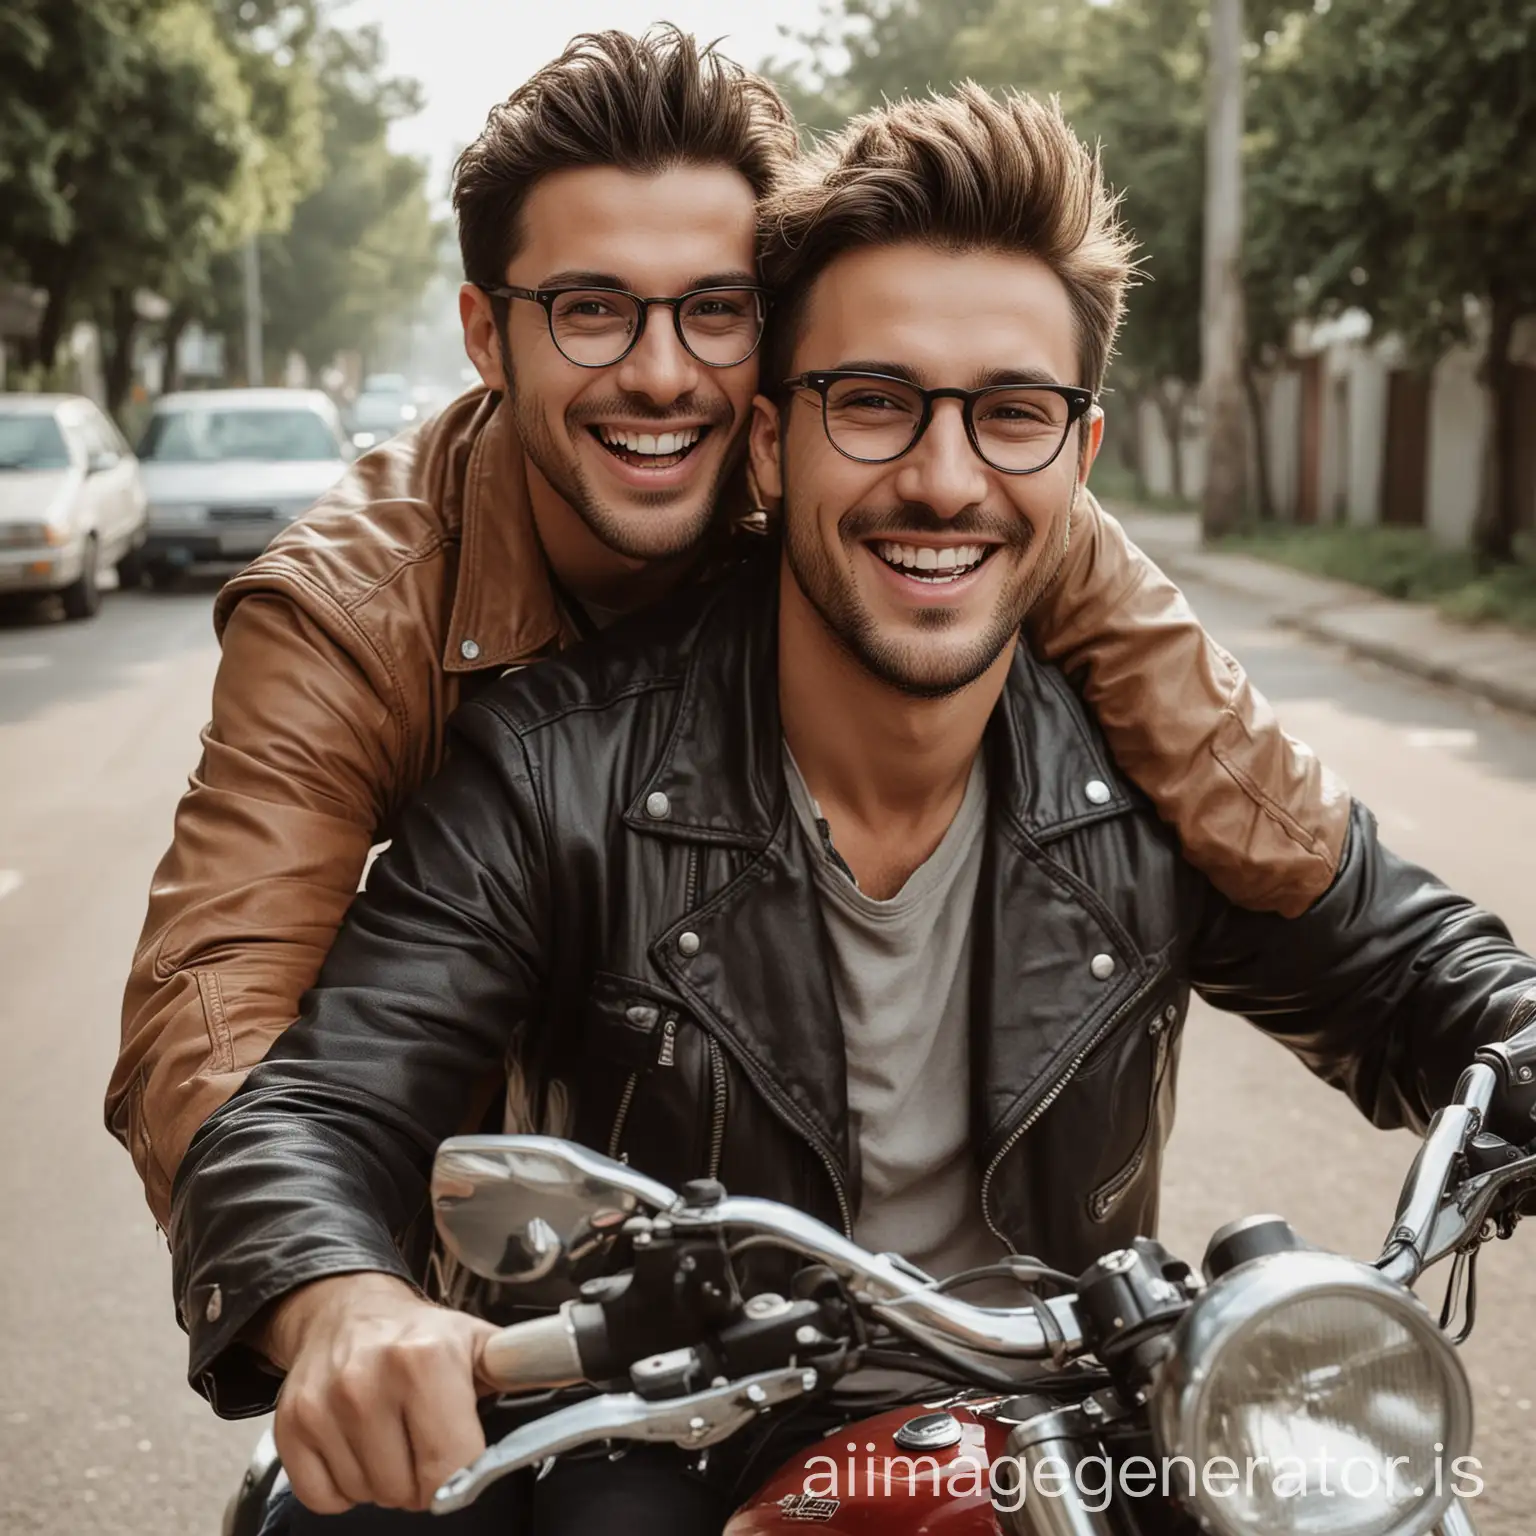 two men riding same motorcycle and smiling and one of them has glasses on his eyes